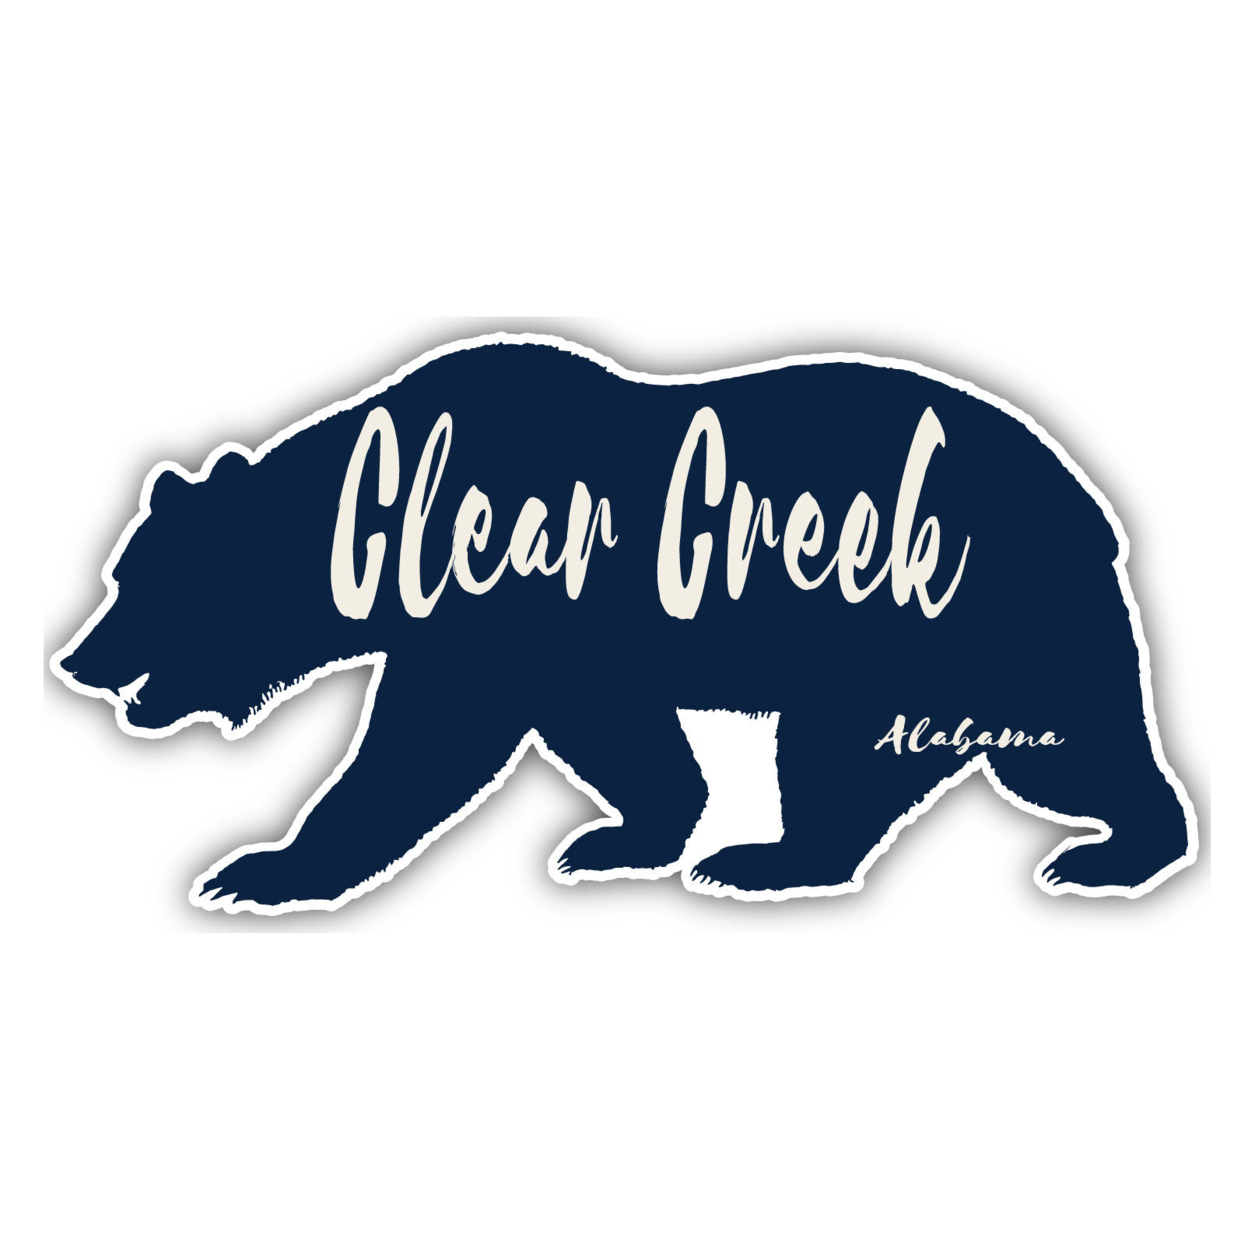 Clear Creek Alabama Souvenir Decorative Stickers (Choose Theme And Size) - 4-Pack, 2-Inch, Tent